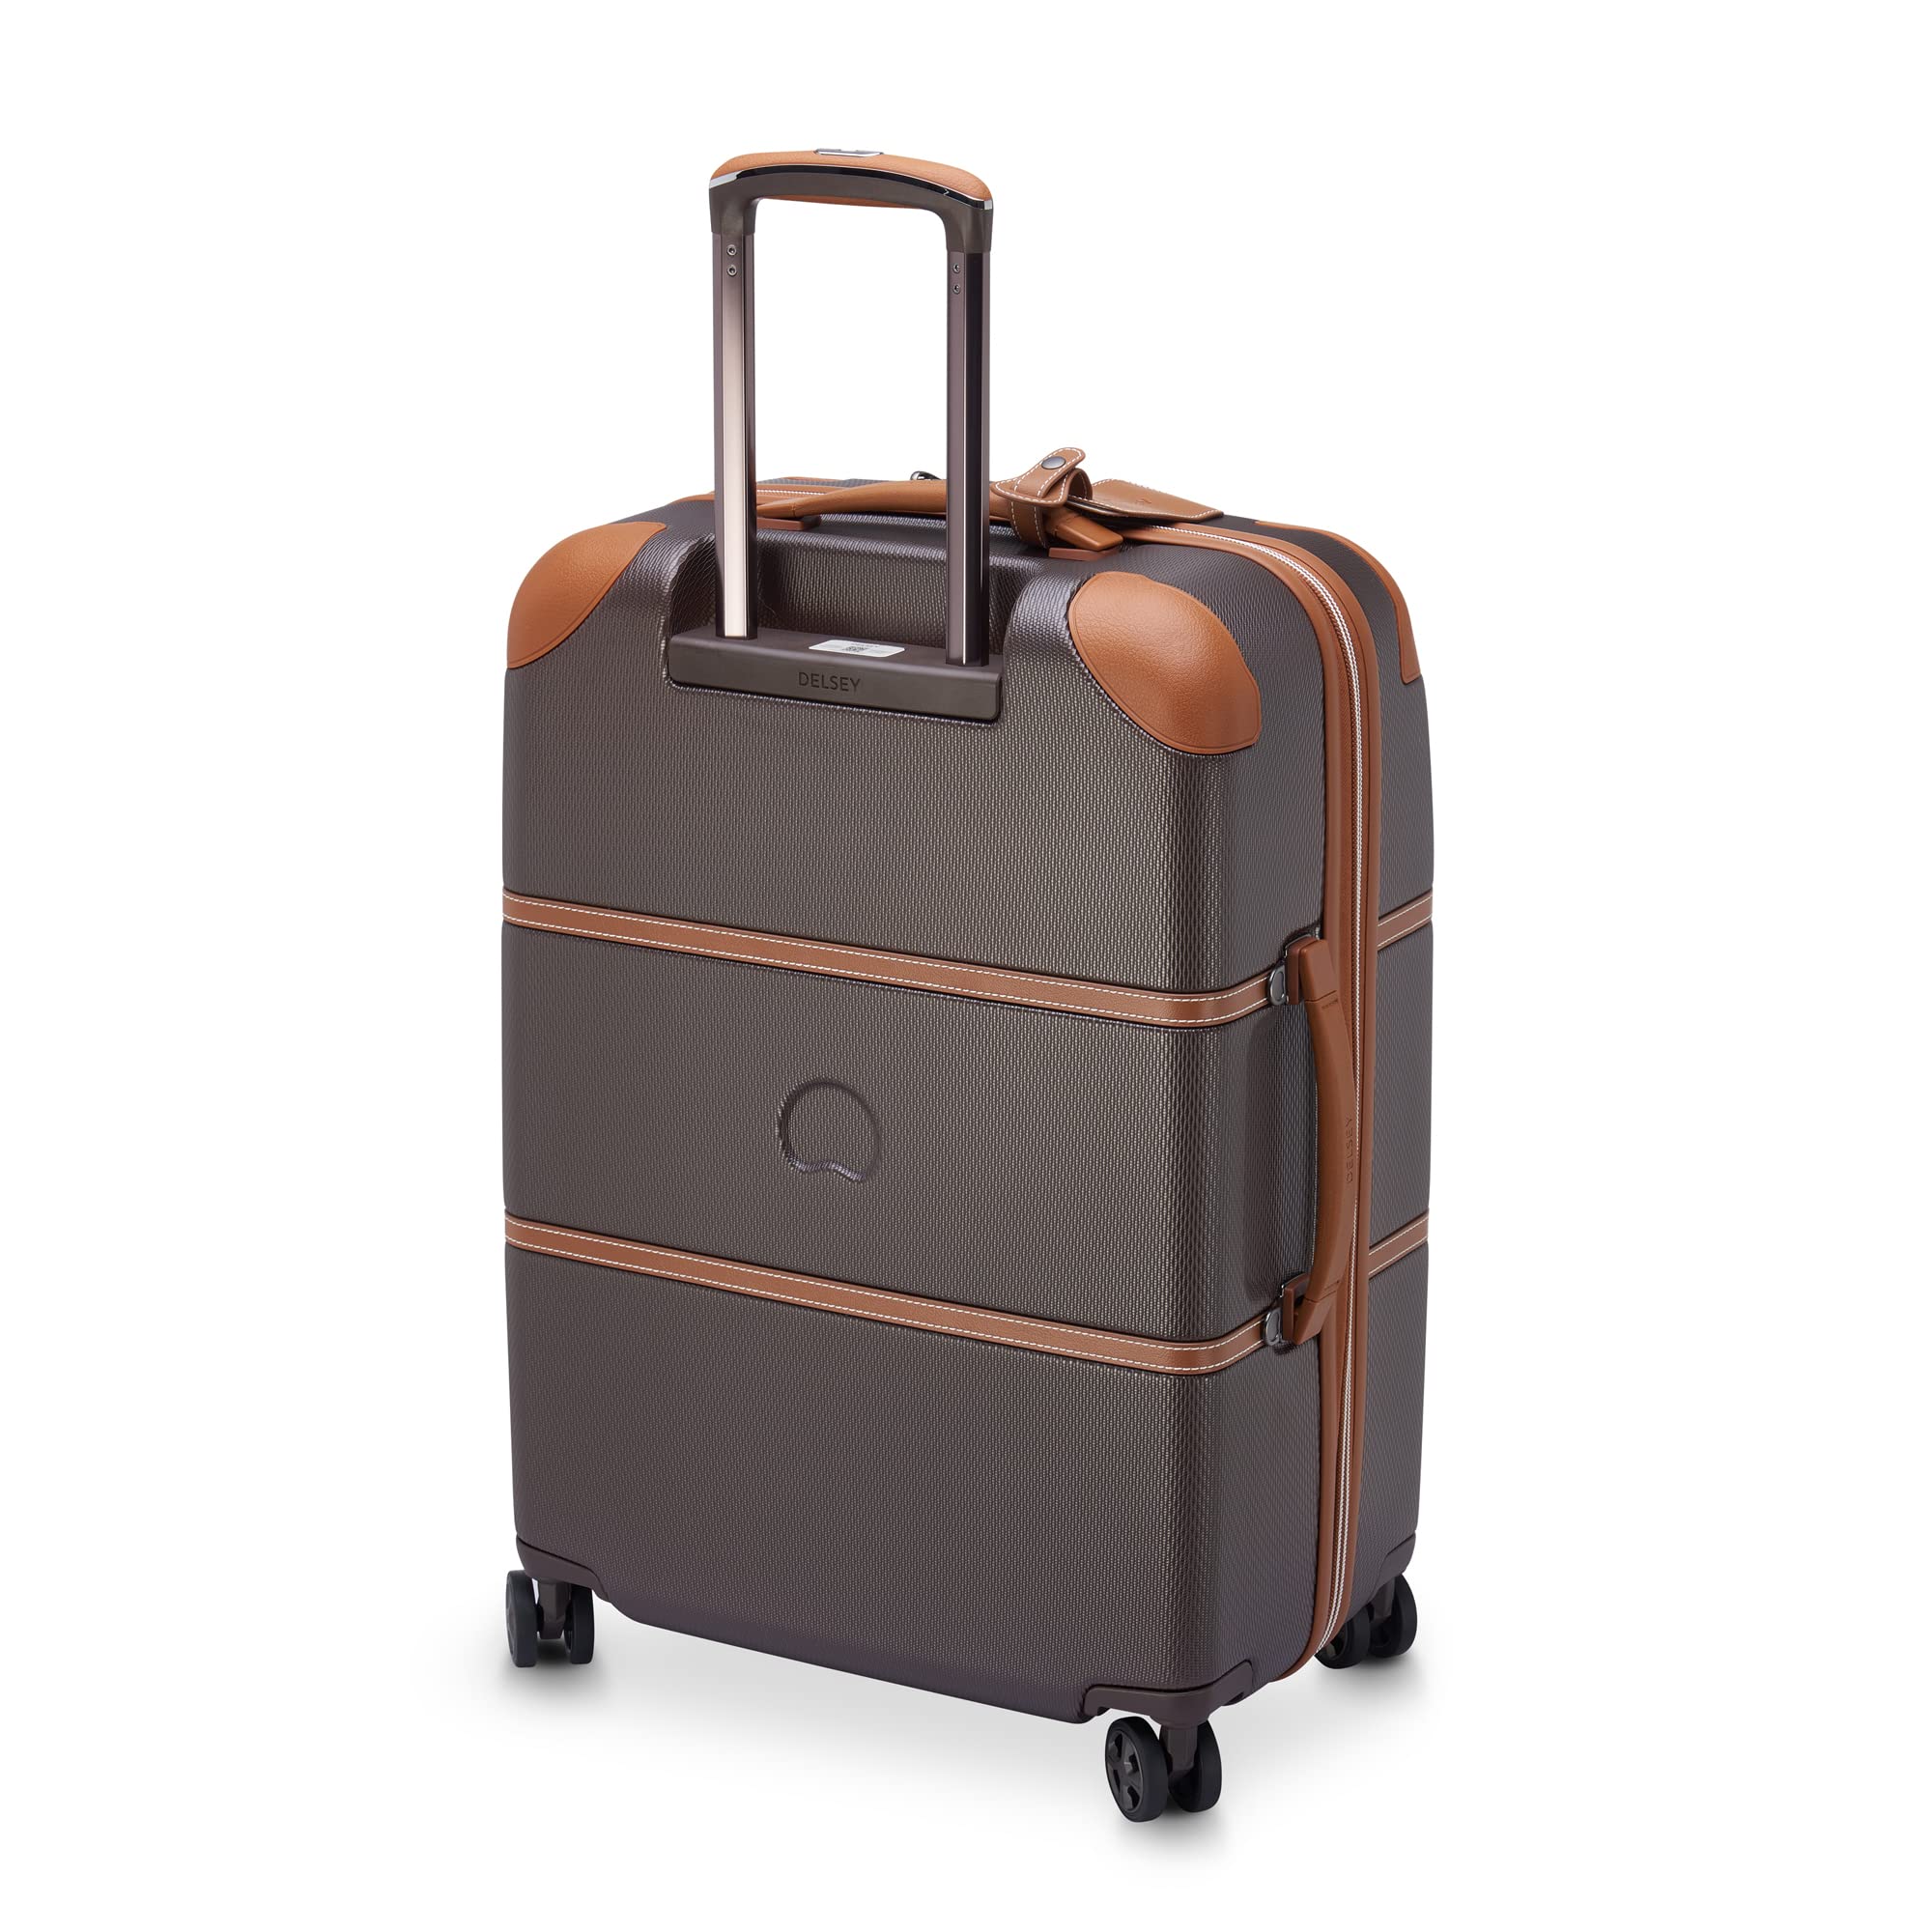 DELSEY Paris Chatelet Hardside 2.0 Luggage with Spinner Wheels, Chocolate Brown, Checked-Medium 24 Inch